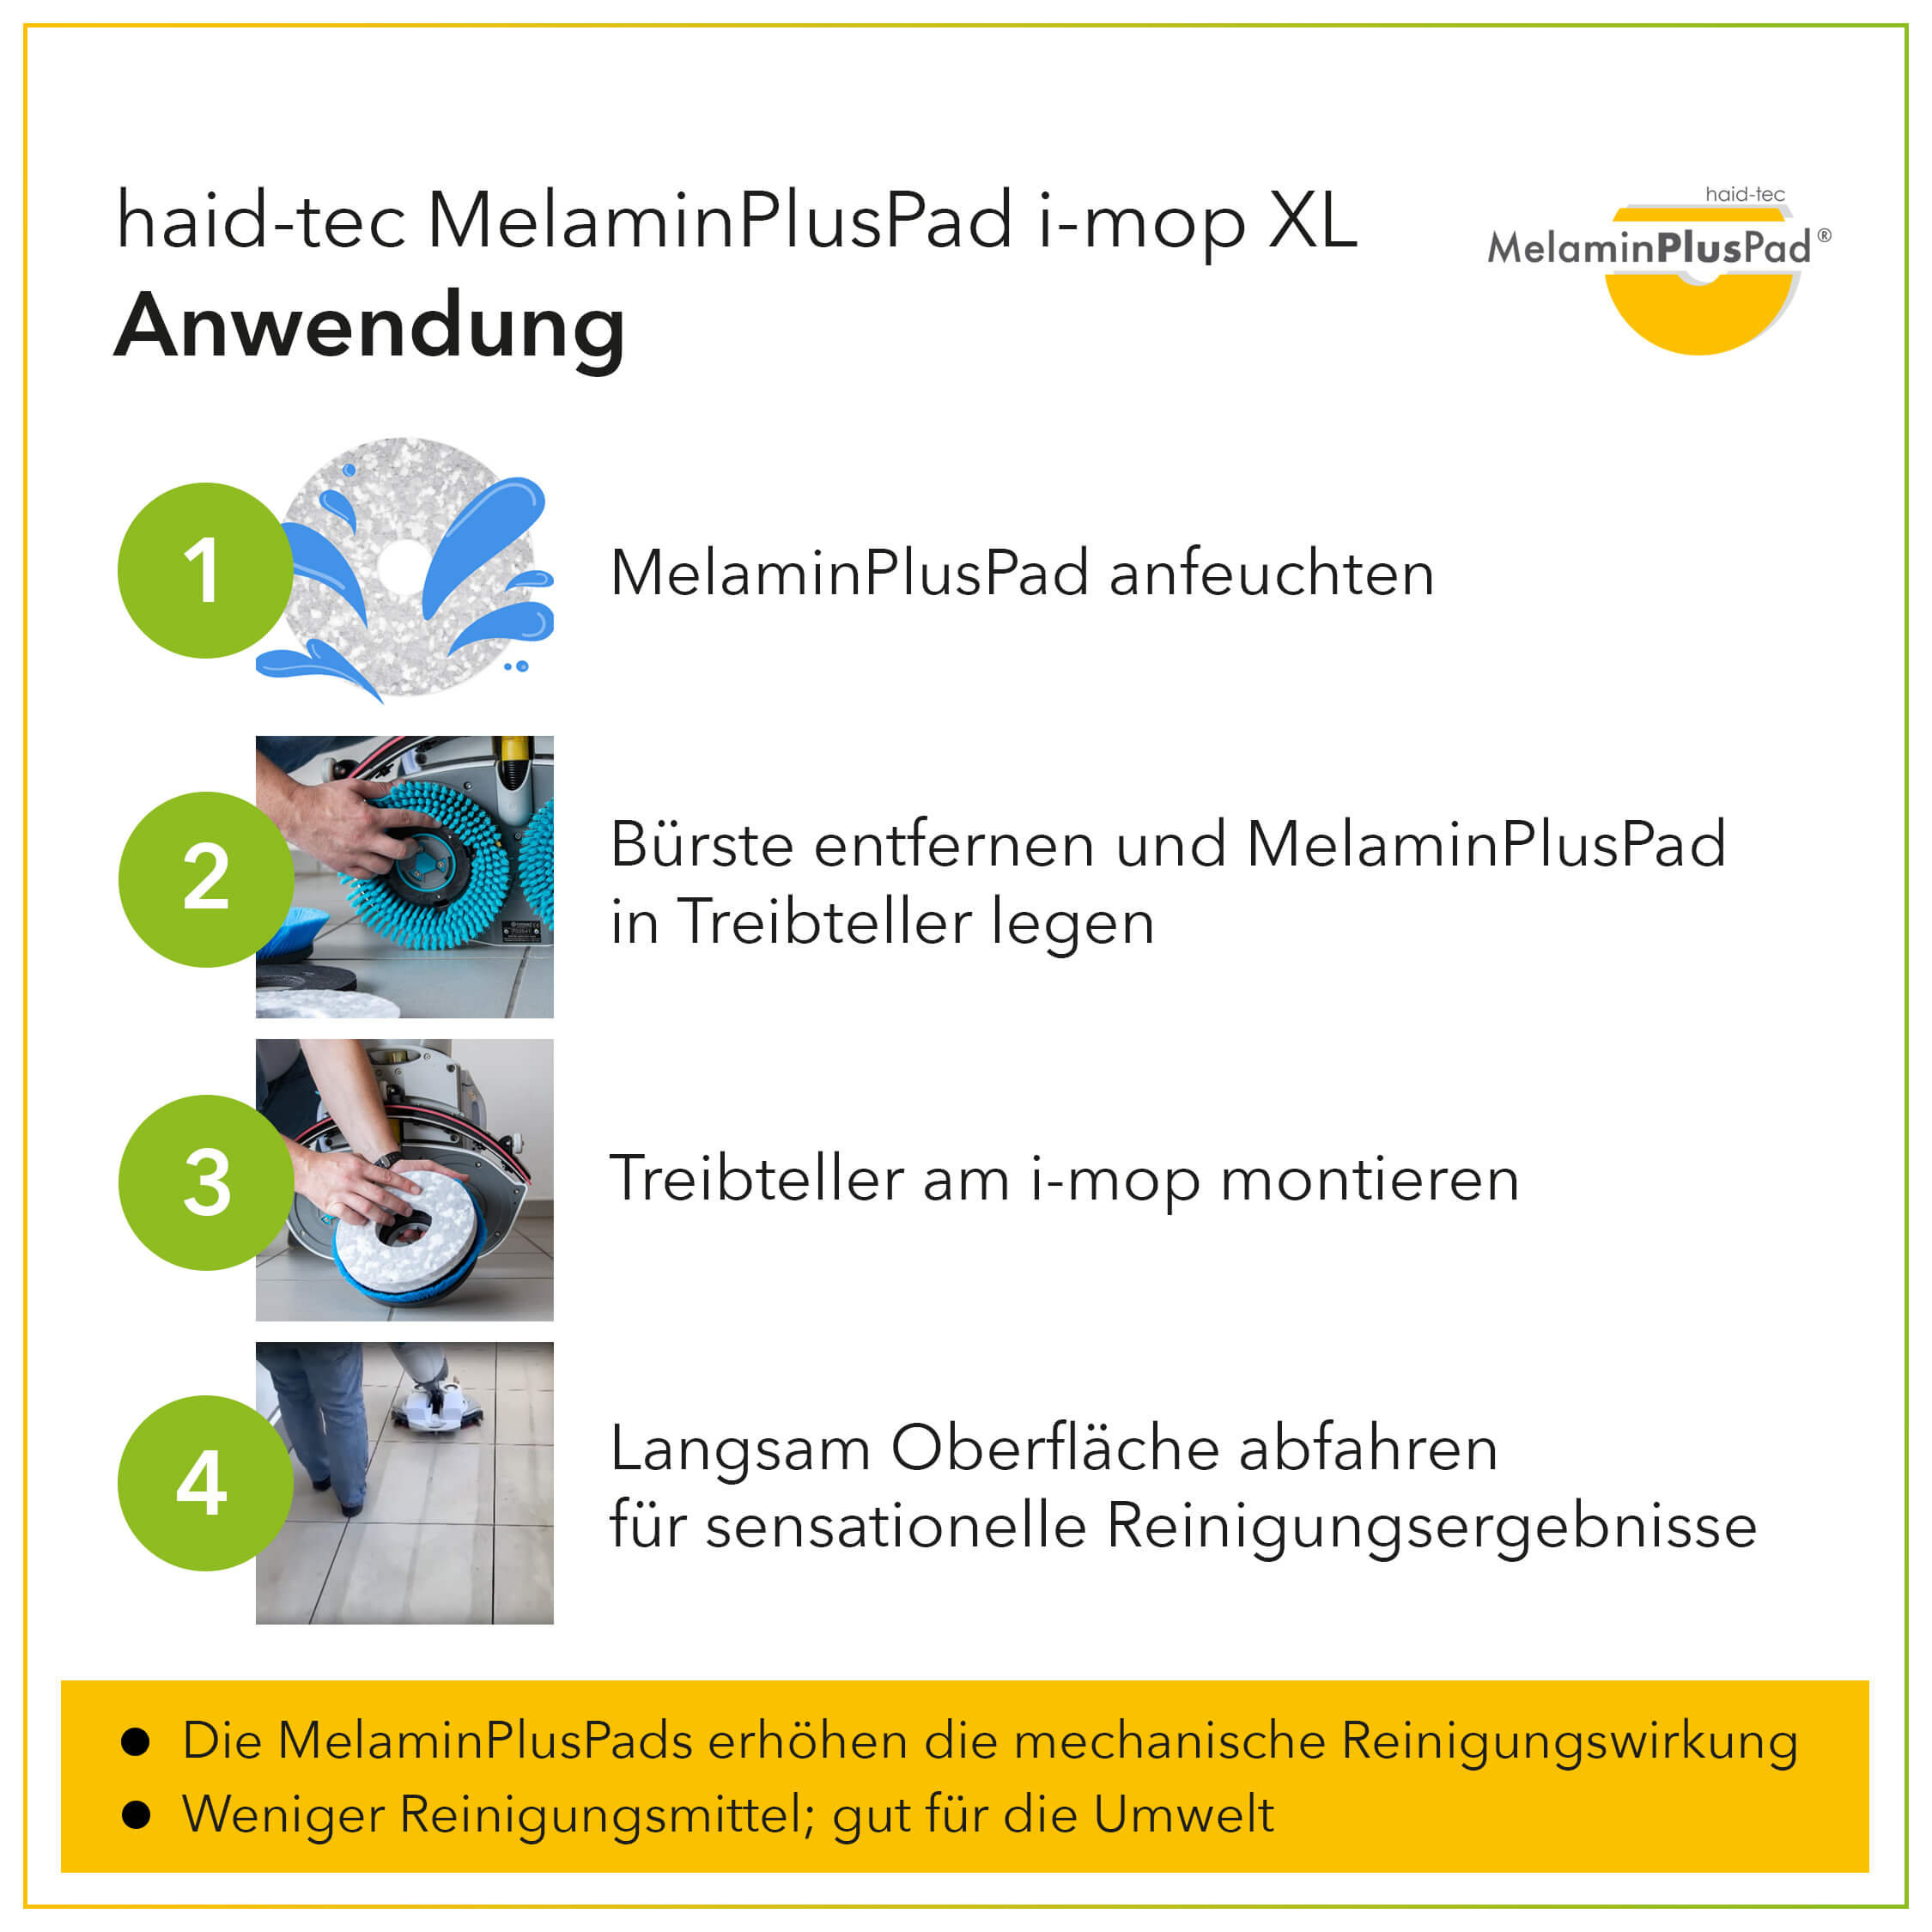 MelaminPlusPad 8inch/203mm pad for i-mop XL - for intensive cleaning and daily cleaning